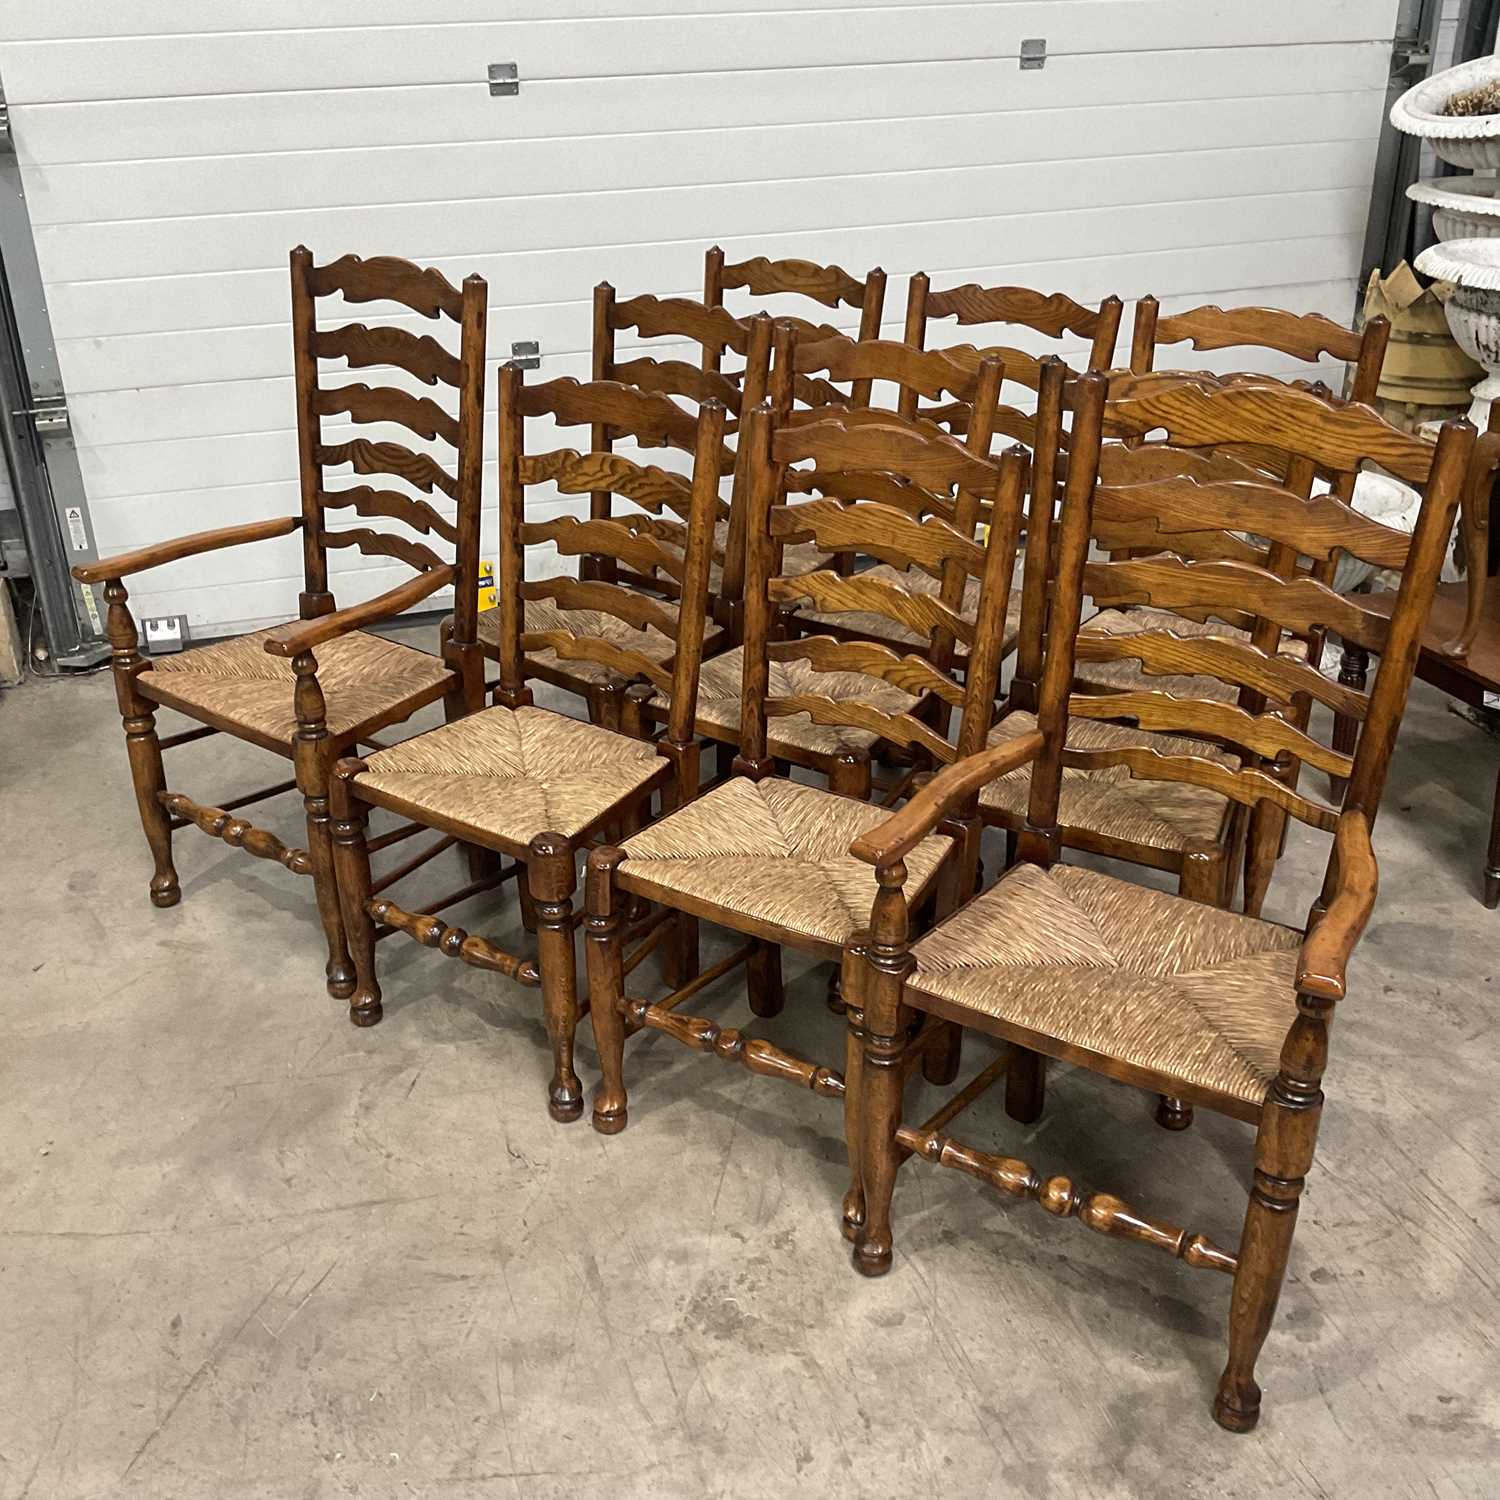 10 Ladder back chairs